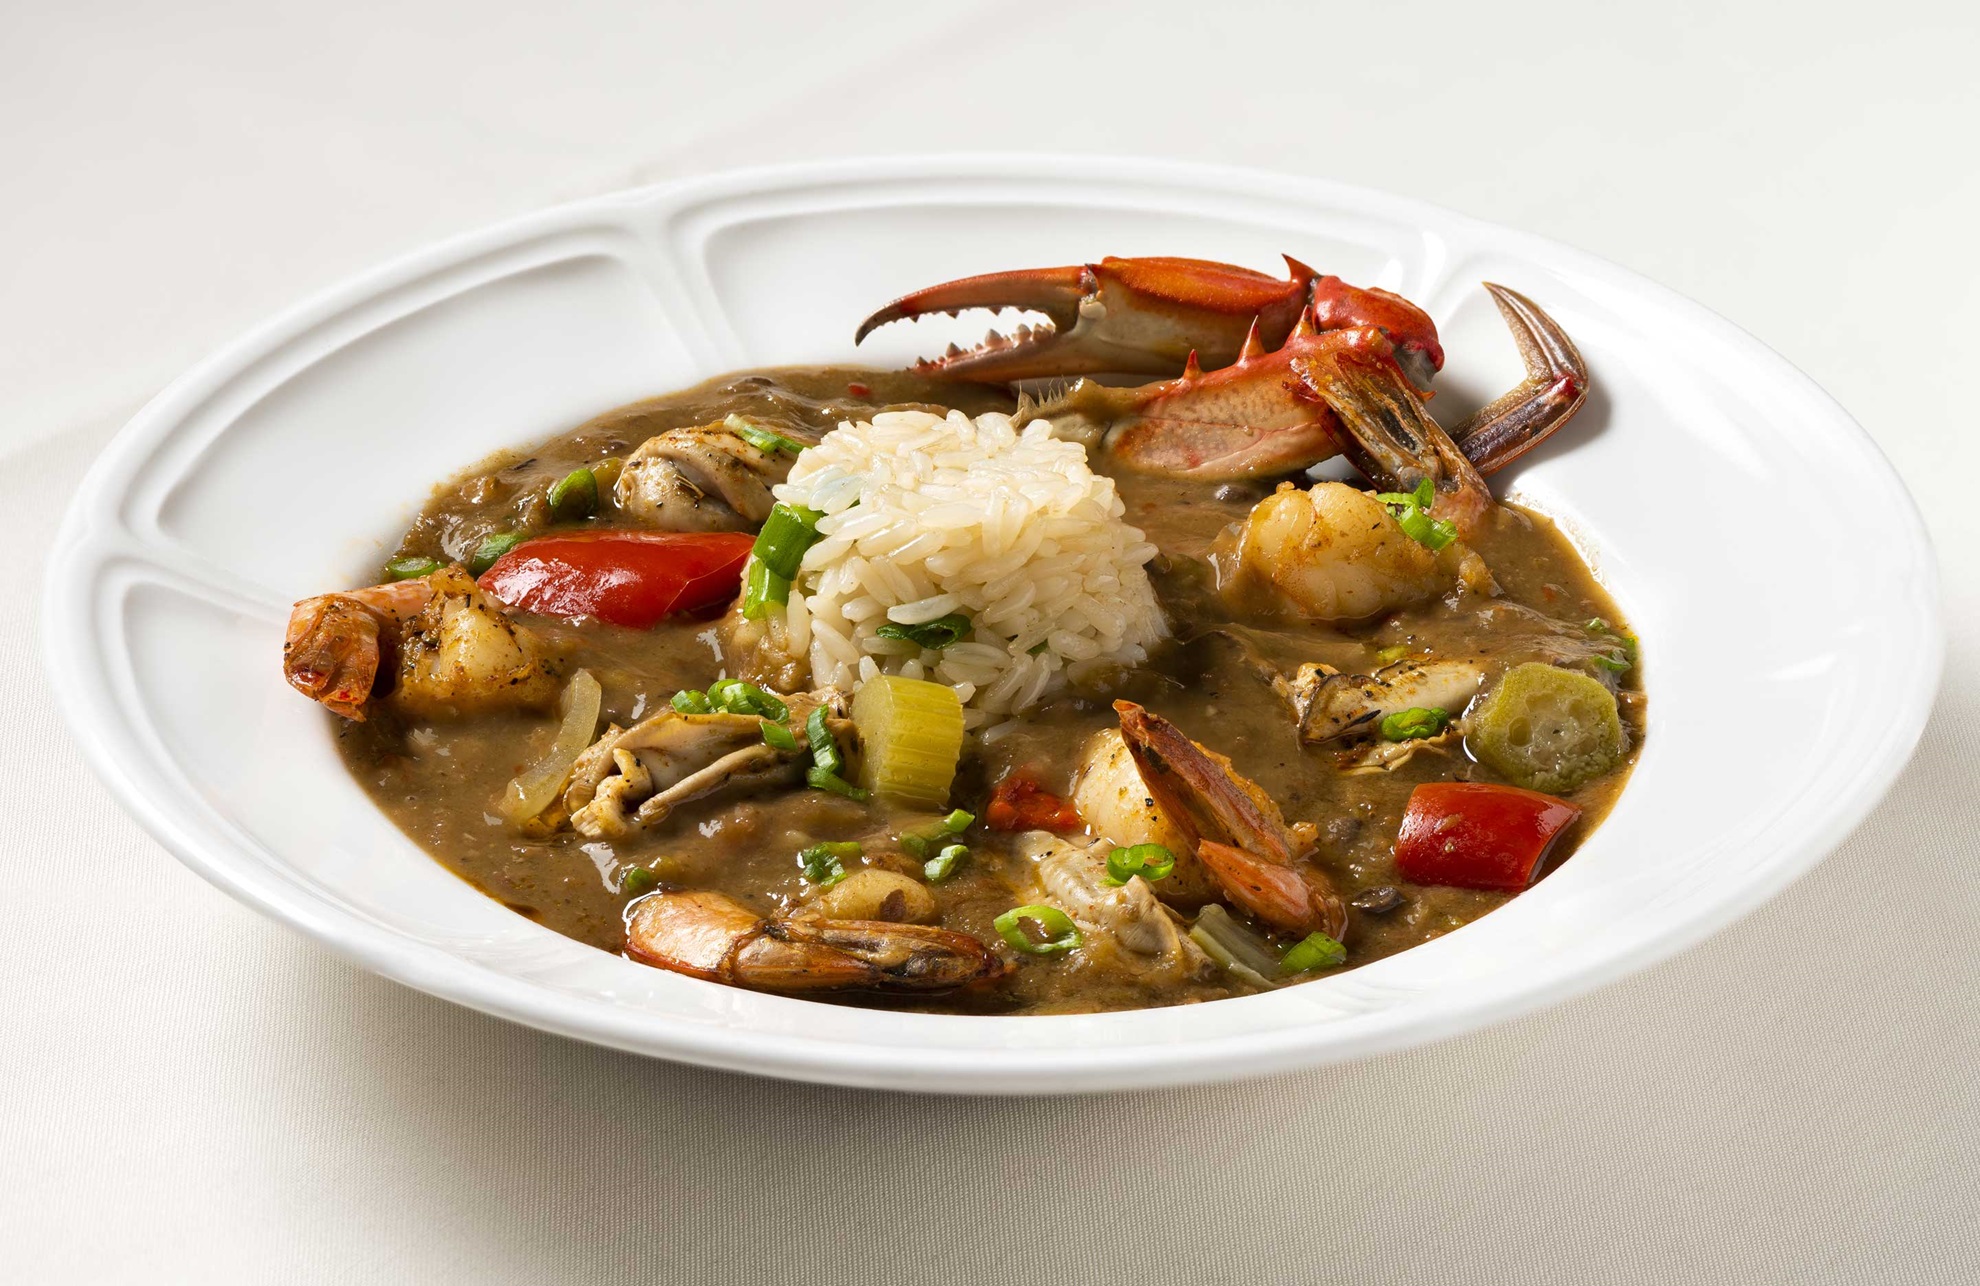 Authentic Gumbo served at Omni Royal Orleans